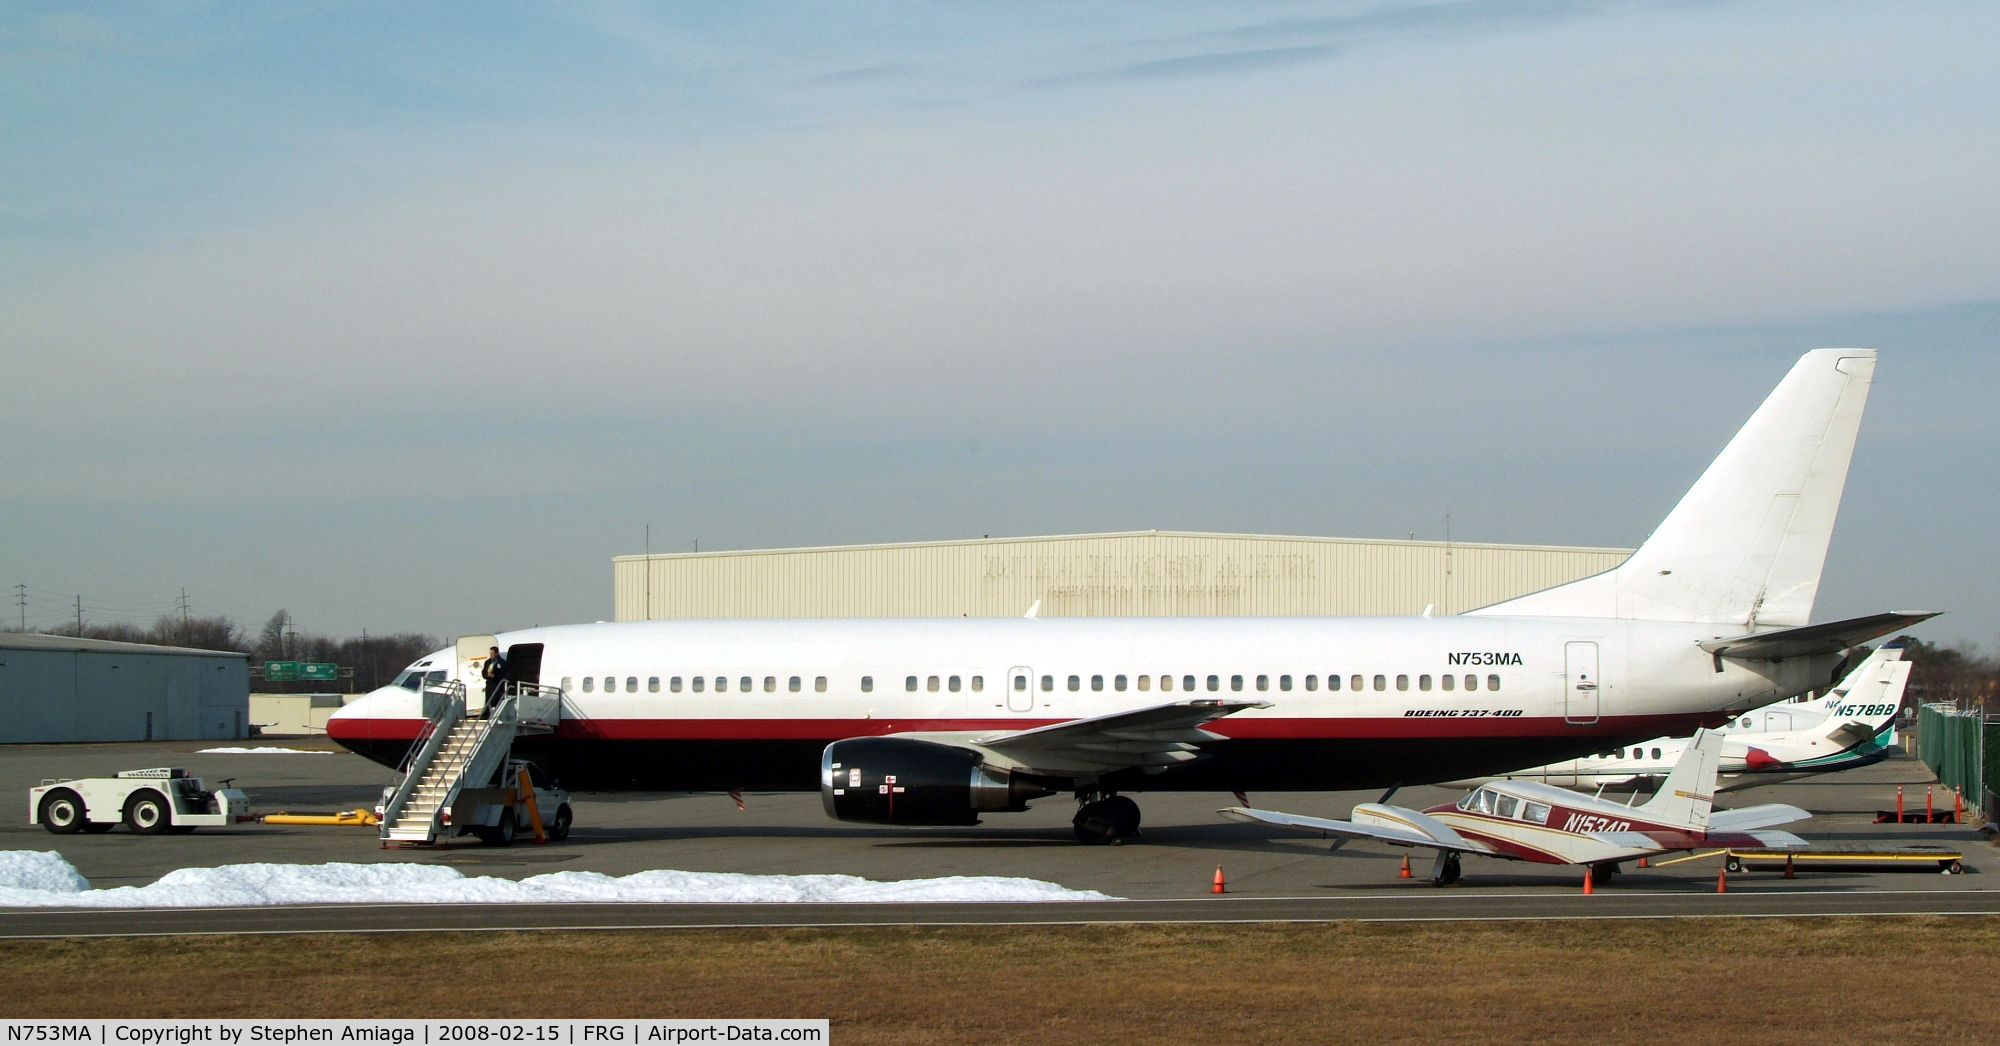 N753MA, 1997 Boeing 737-48E C/N 28053, BBJ parked at Atlantic, my 600th acft photo!